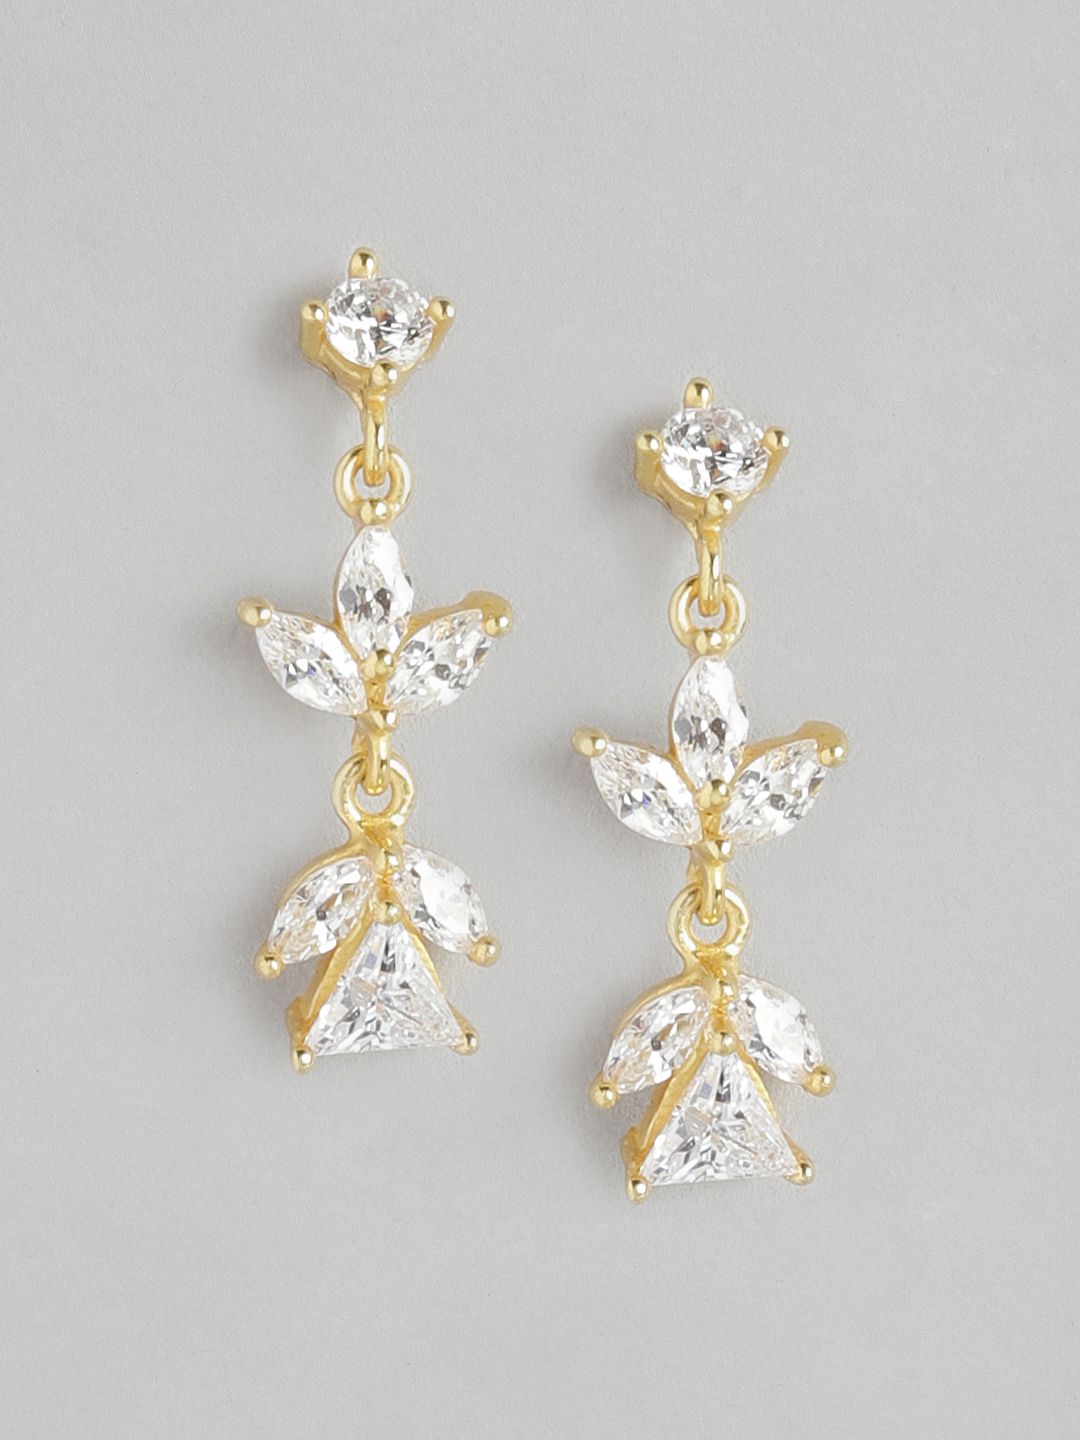 Carlton London Gold-Toned Floral Drop Earrings Price in India